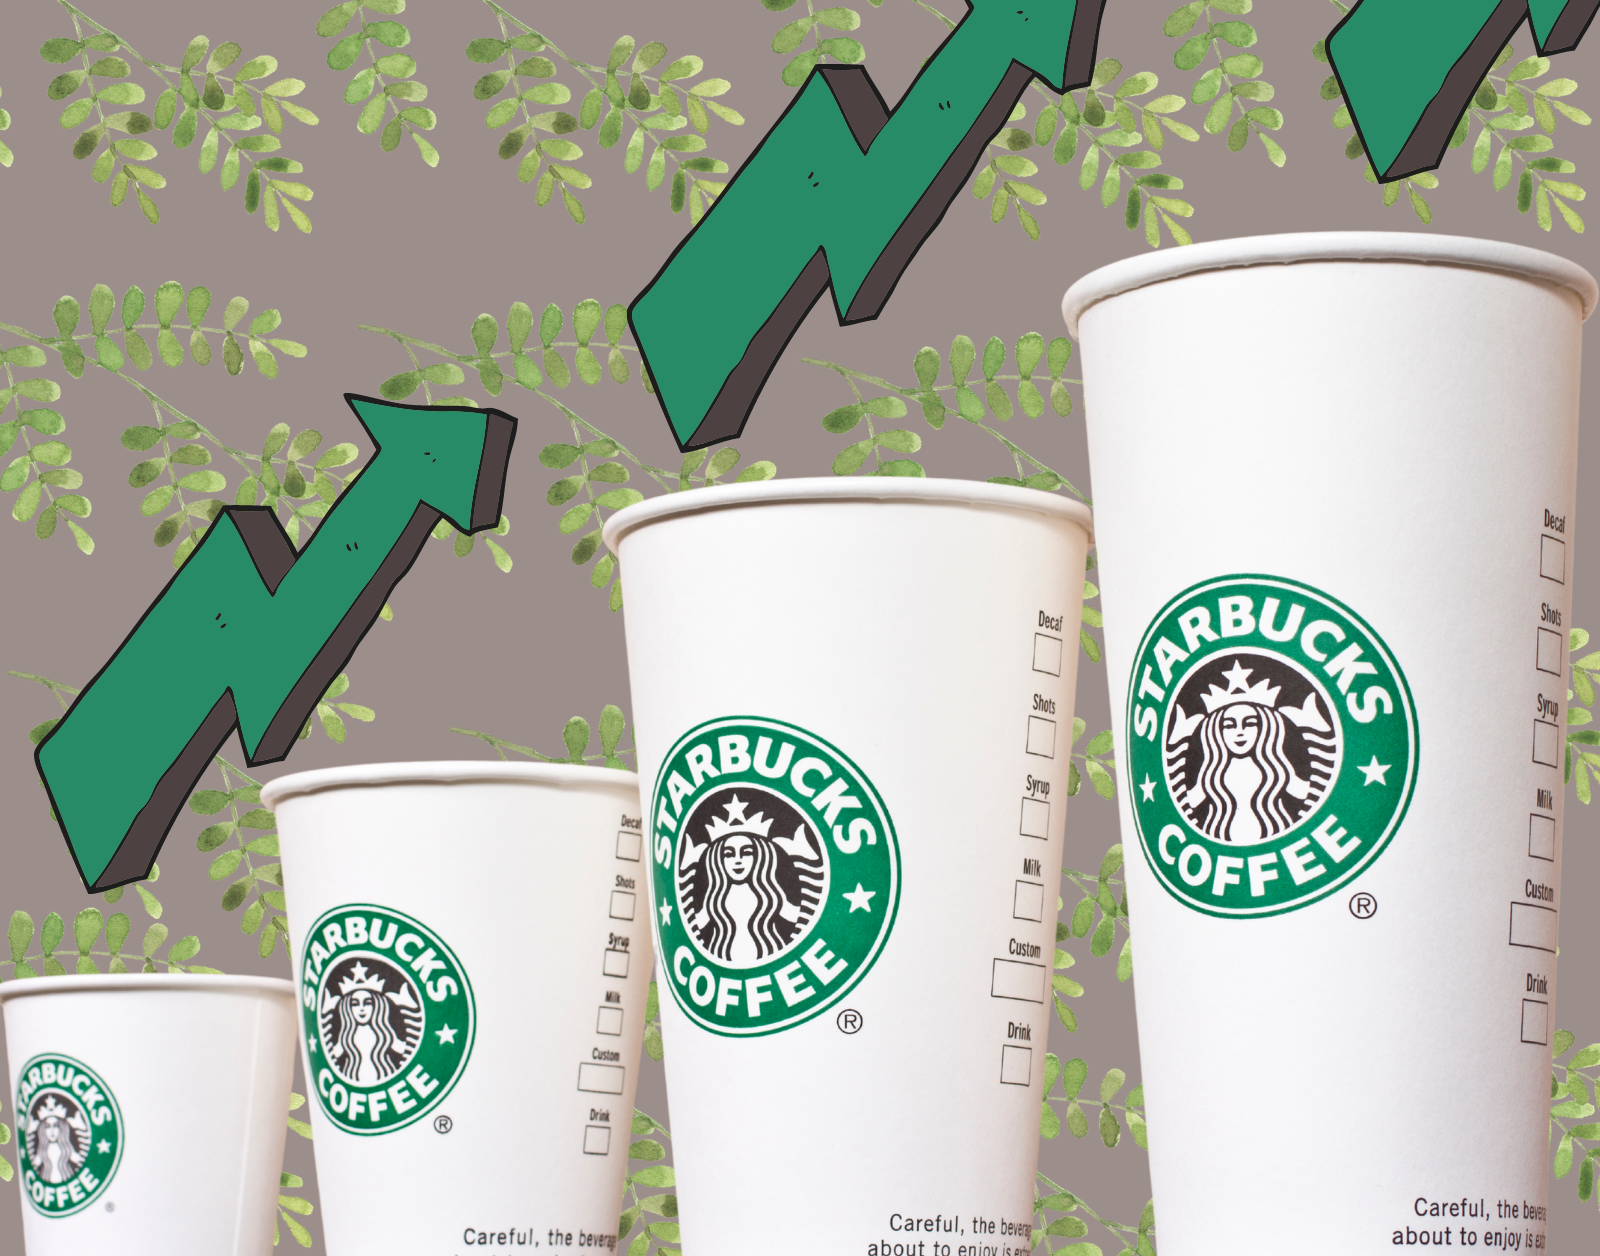 https://sustainablereview.com/wp-content/uploads/2021/01/Is-starbucks-sustainable_.png